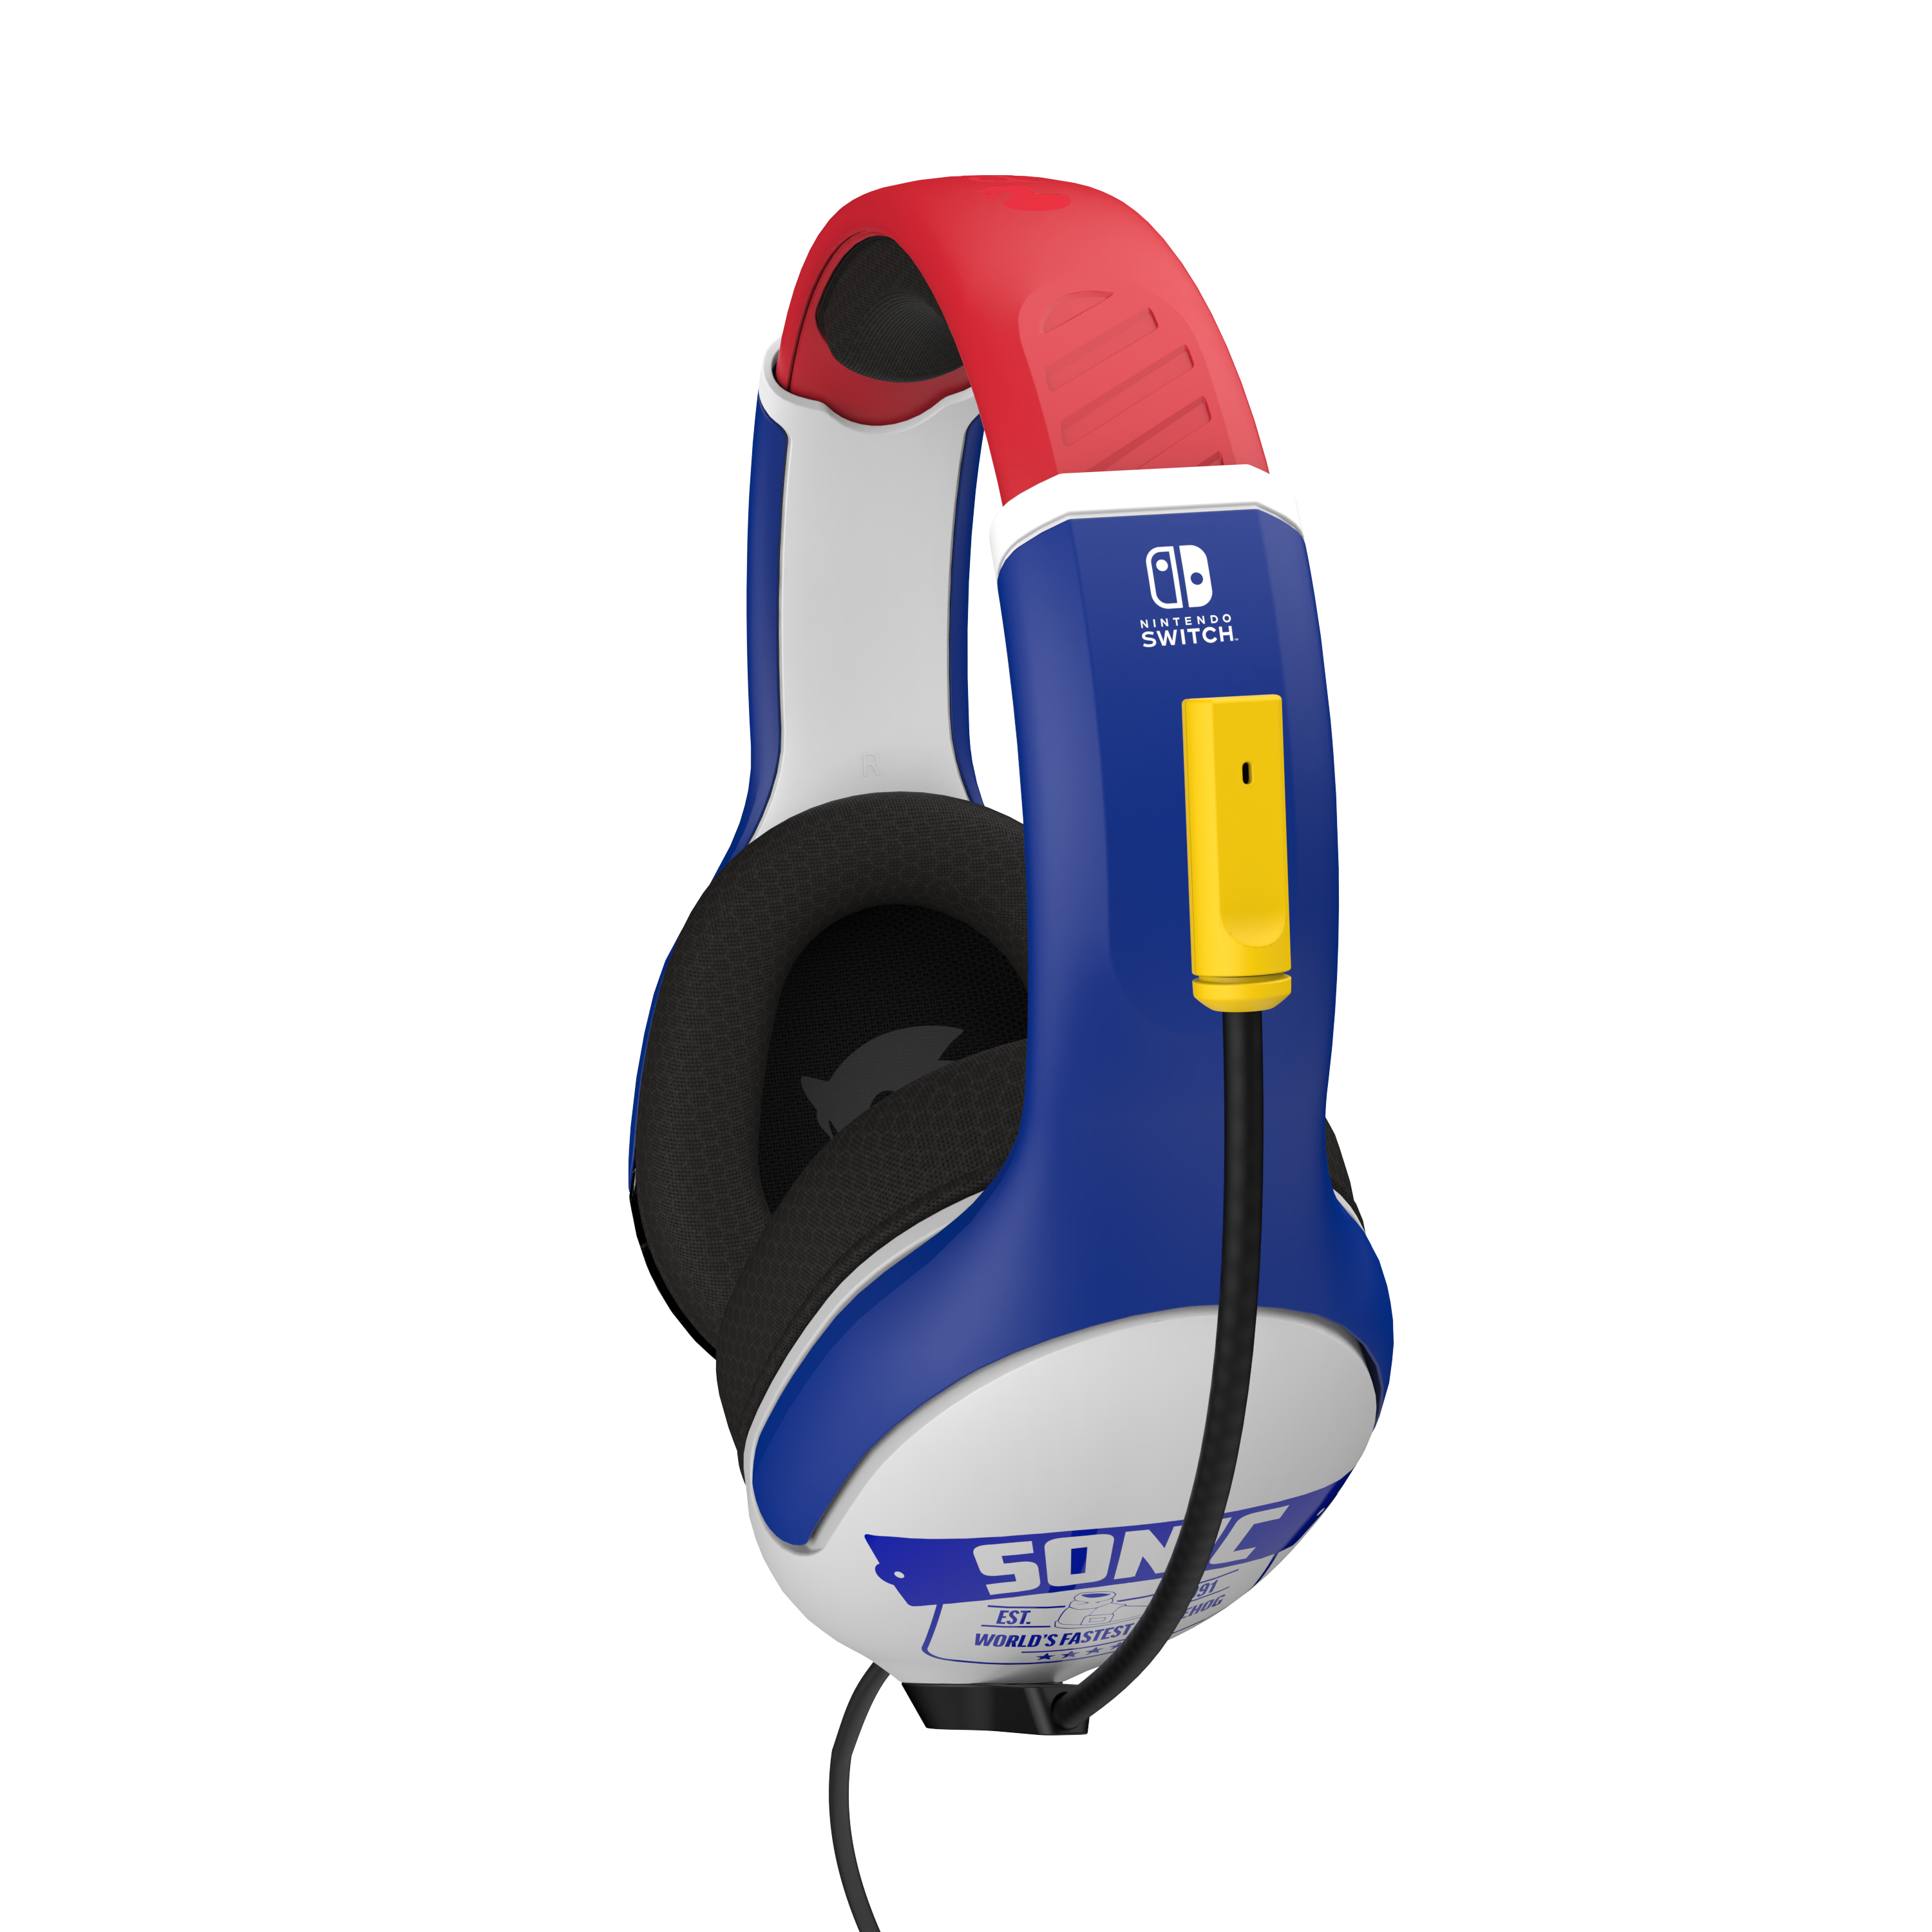 PDP Realmz Sonic the Hedgehog Wired Headset for Nintendo Switch